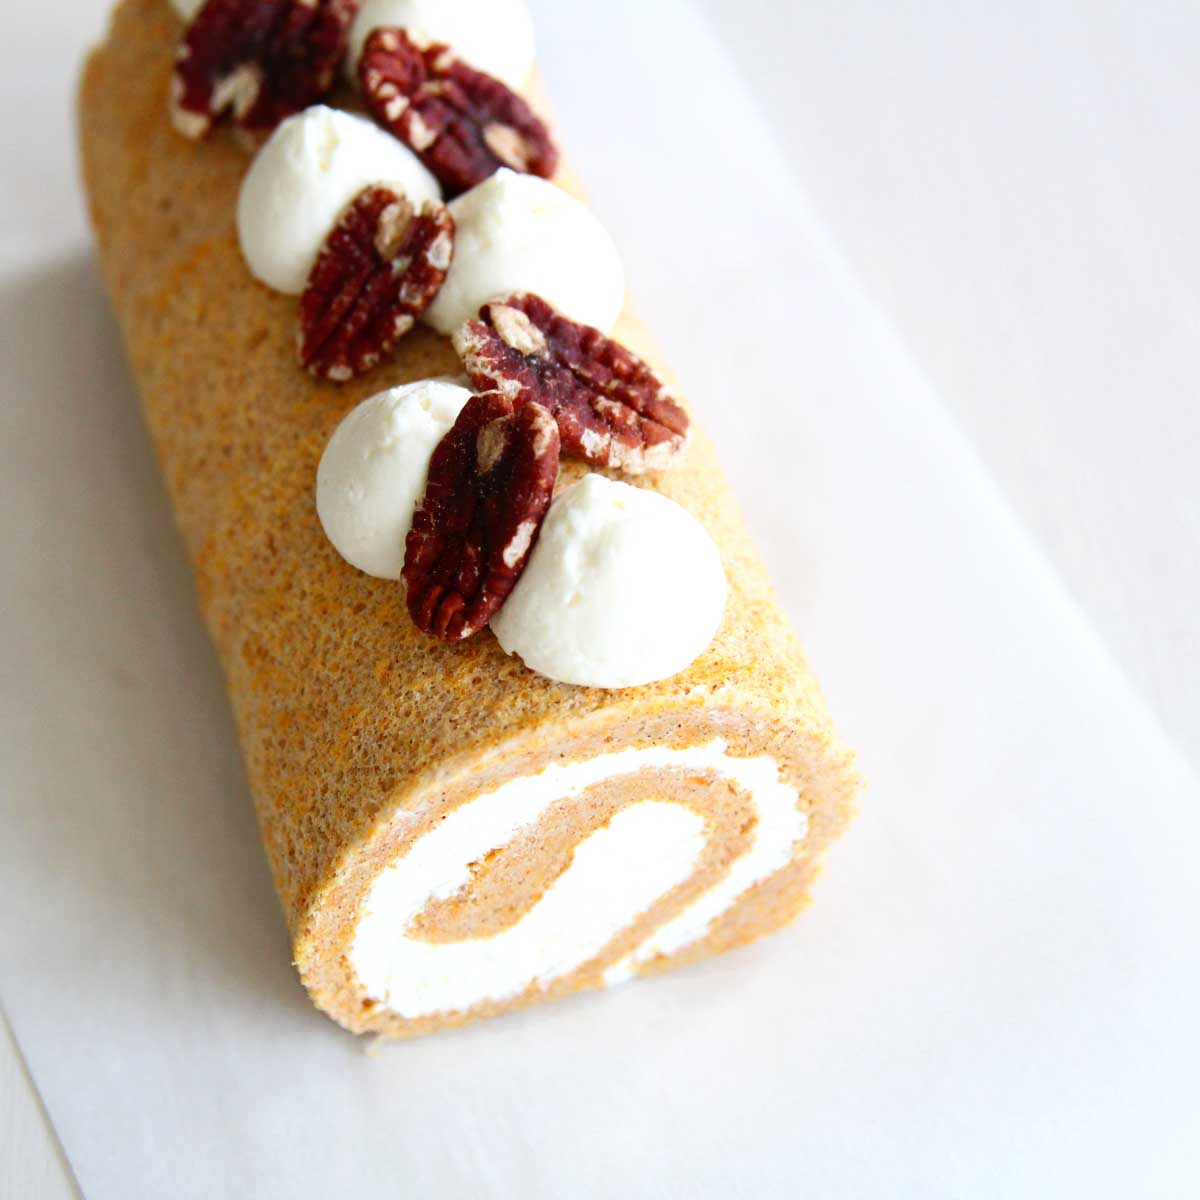 Flourless Sweet Potato Swiss Roll Cake (Lower Carb, Lower Calorie Recipe) - Strawberry Cheesecake Whipped Cream